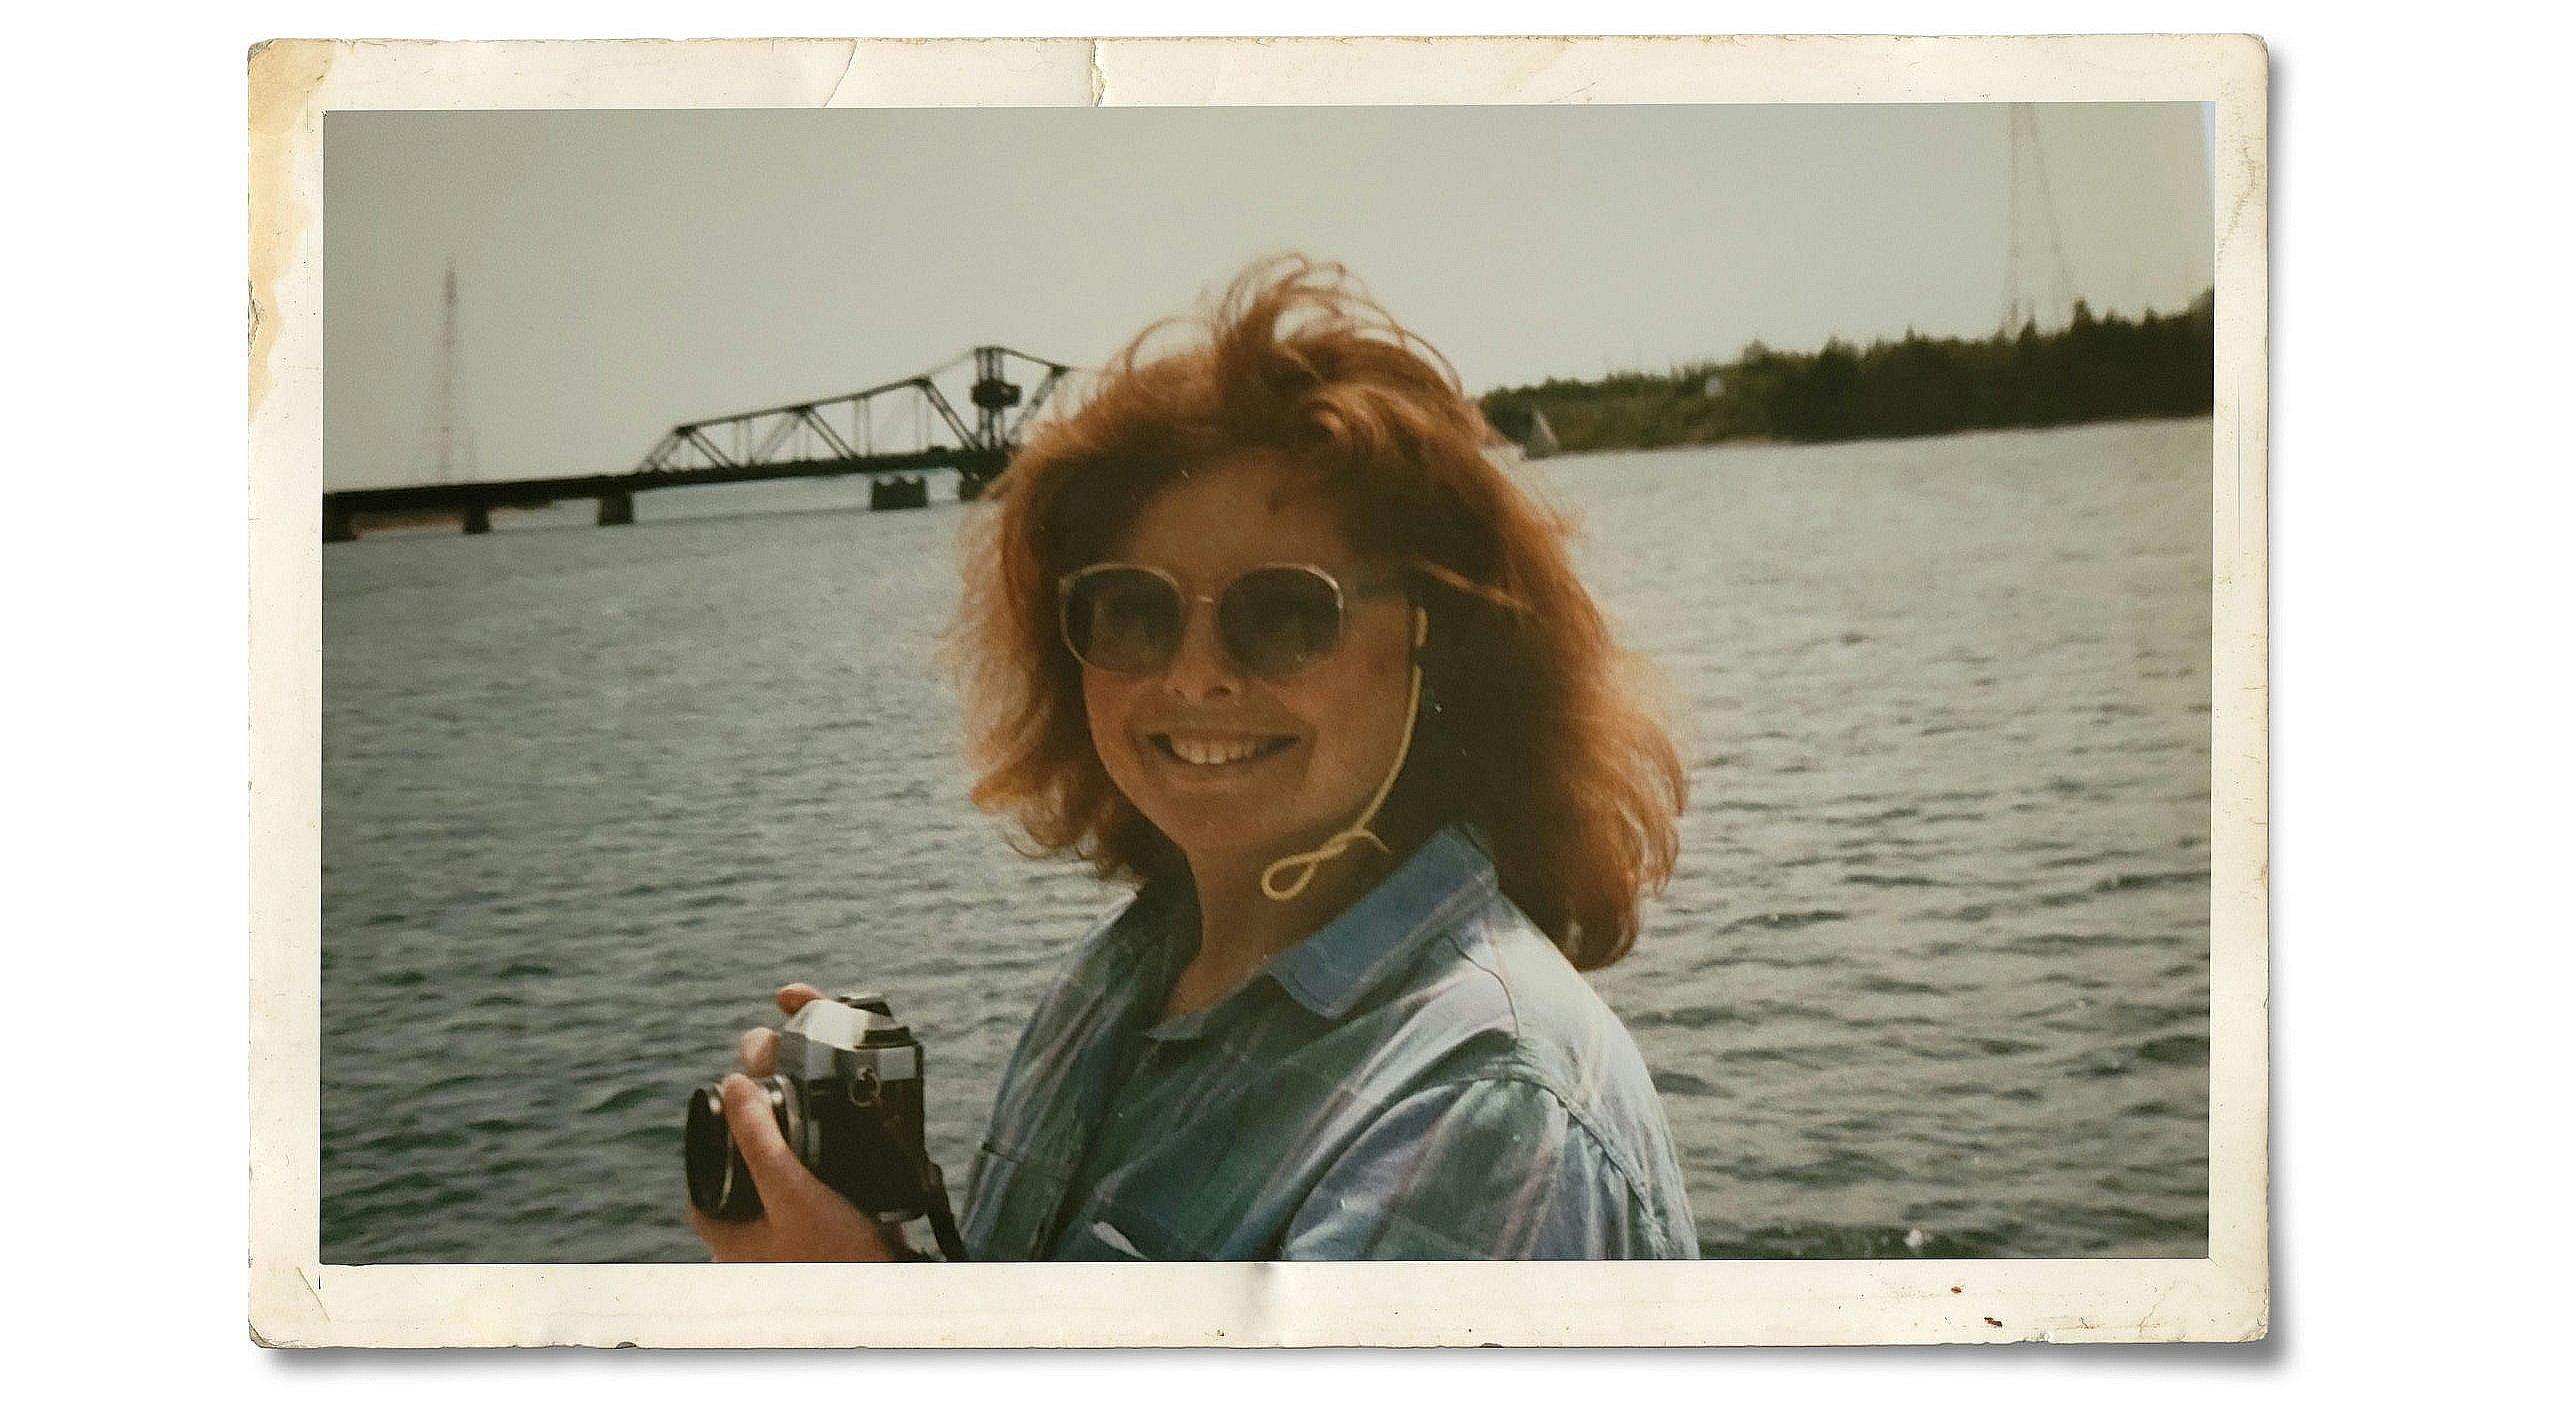 Woman with short orange hair and wearing a washed out blue shirt and black sunglasses holding a camera, smiling, against the backdrop of a large body of water.